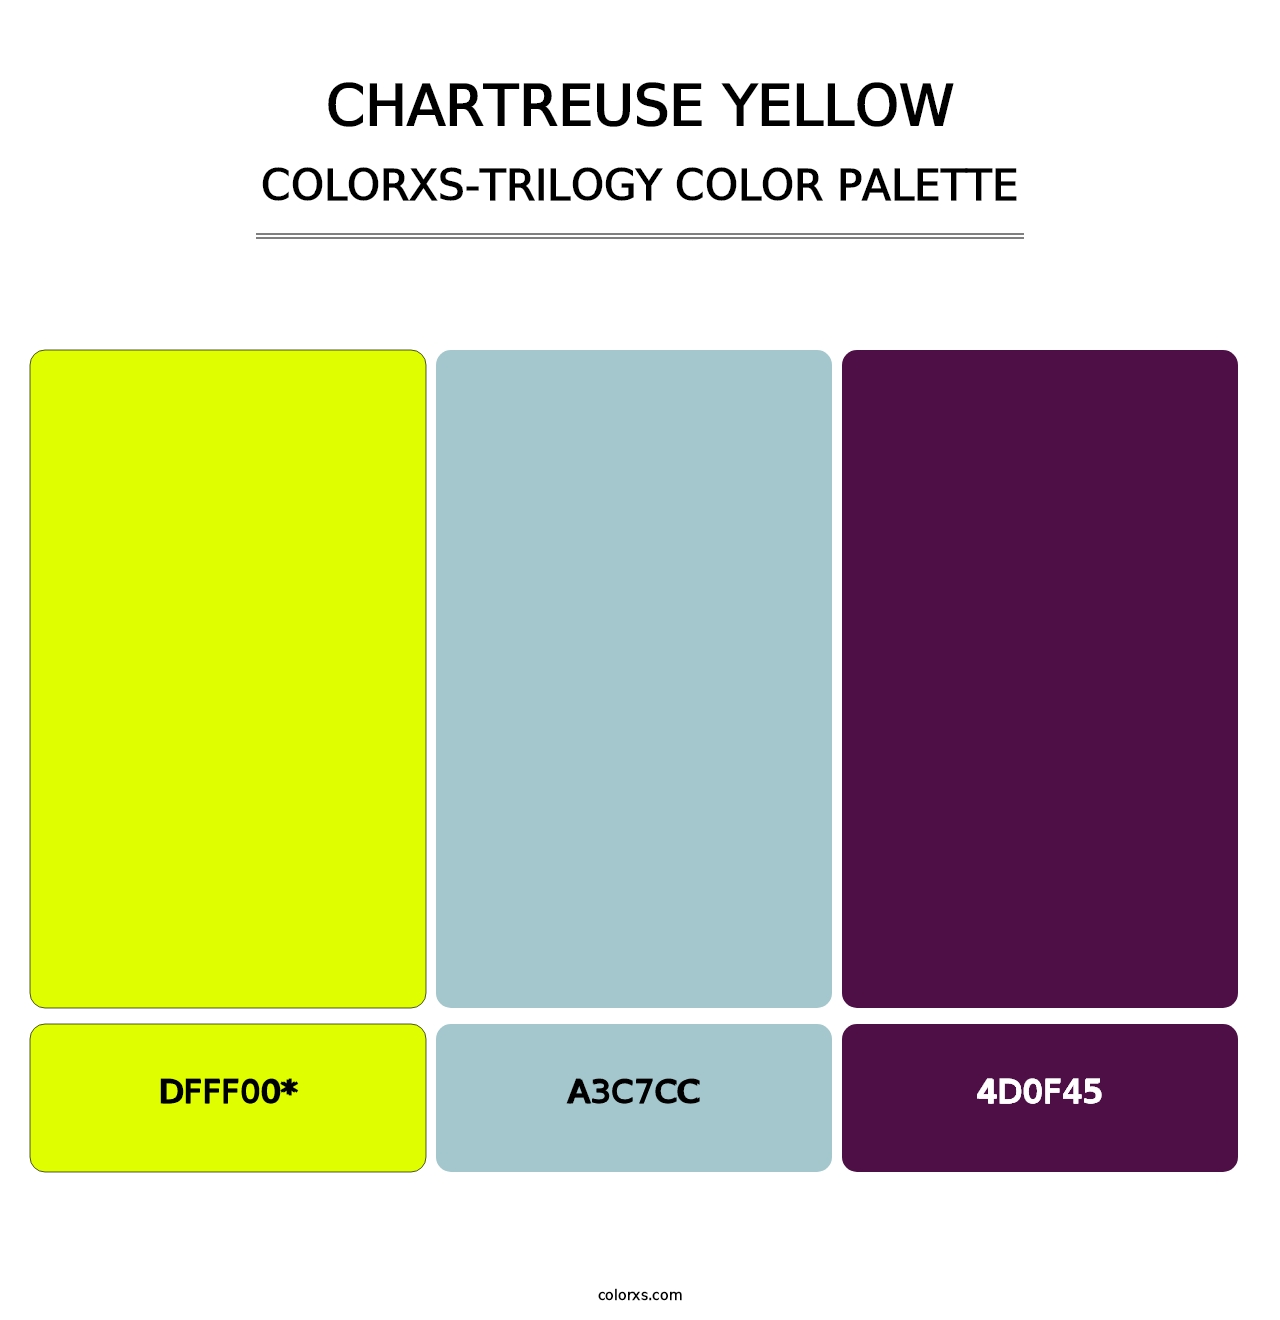 Chartreuse Yellow - Colorxs Trilogy Palette